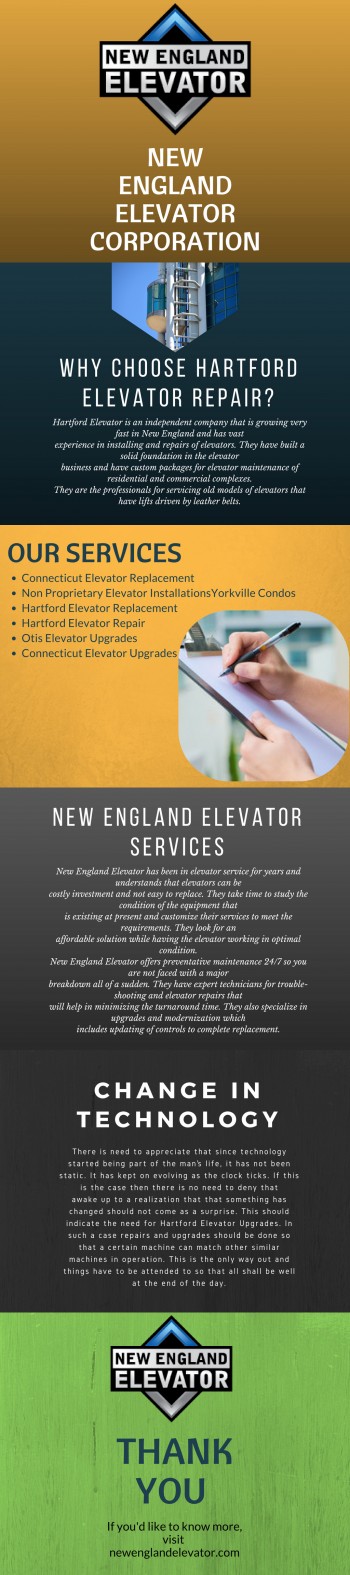 Hartford Elevator Repair Our expert technicians are Otis elevator modernization to provide better diagnostics and easier access to replacement parts.  Website: https://newenglandelevator.com by englandelevator